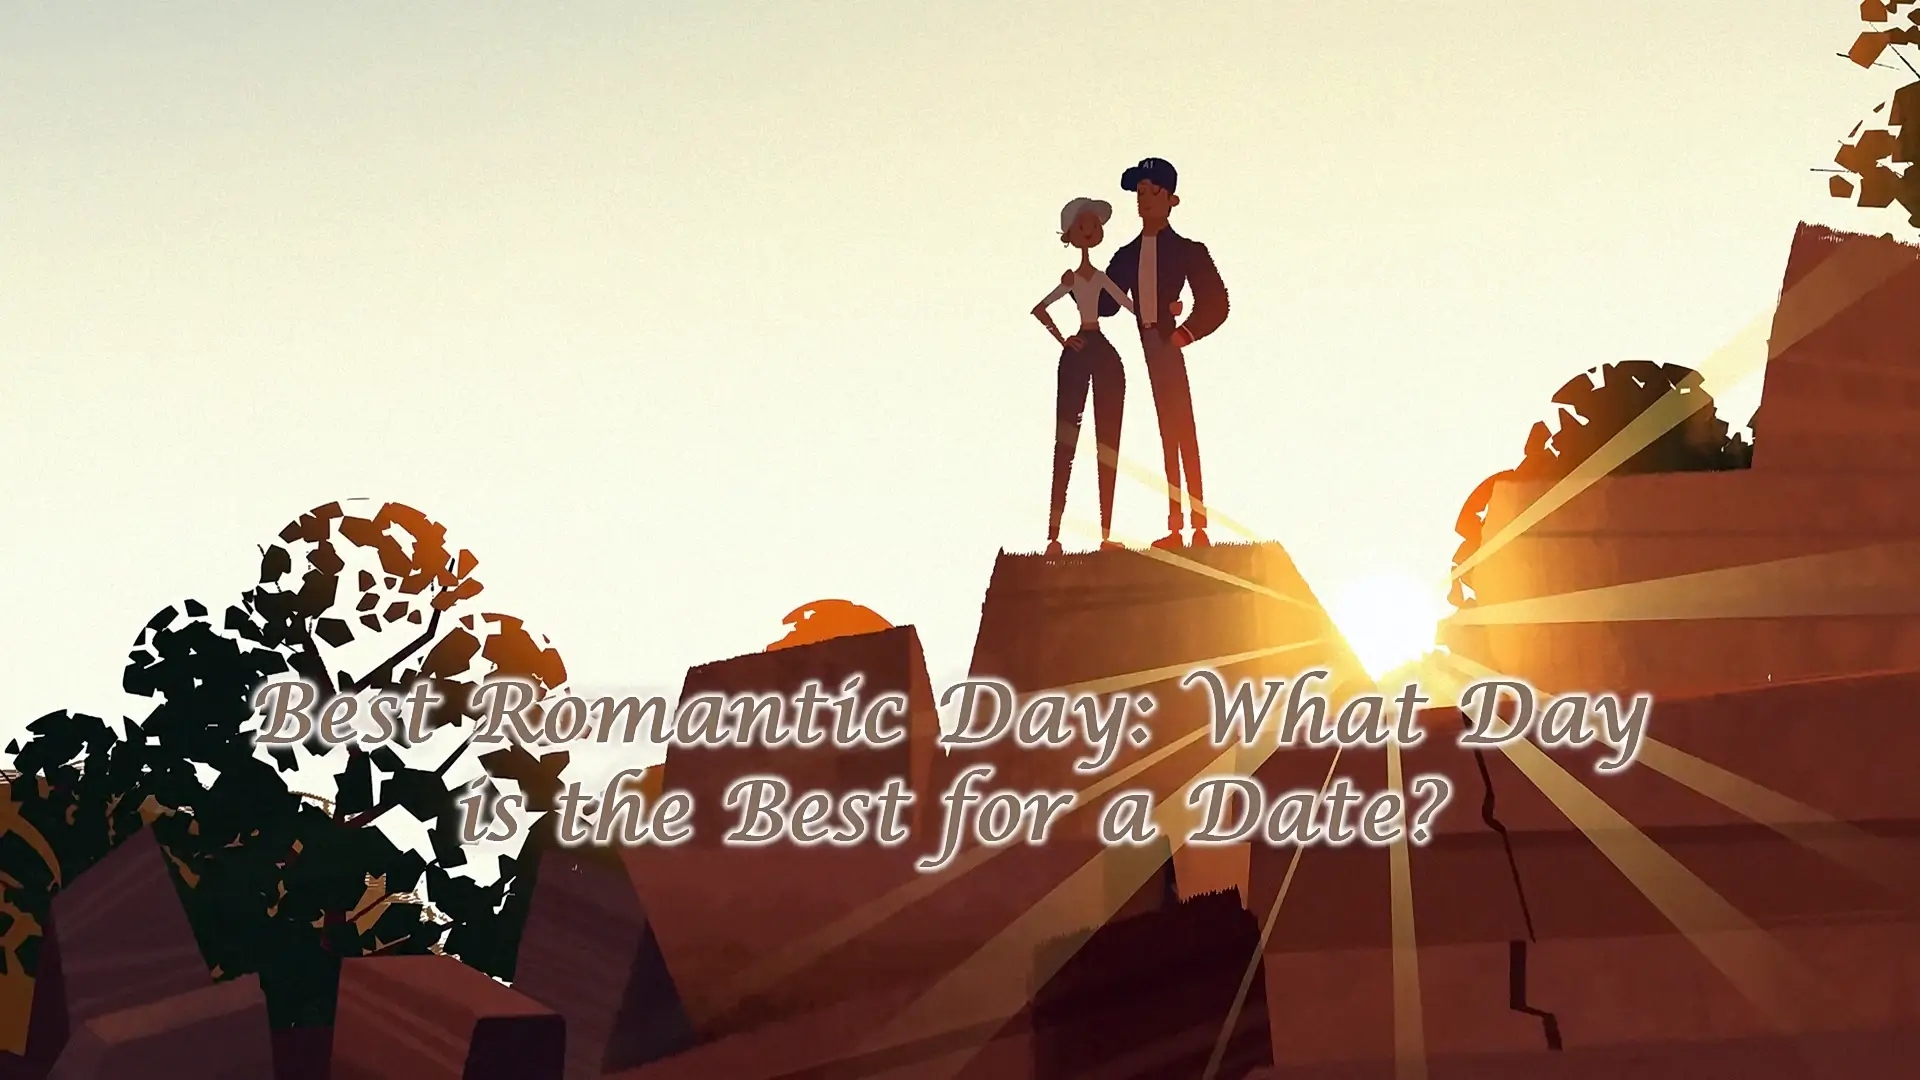 Best Romantic Day: What Day is the Best for a Date?